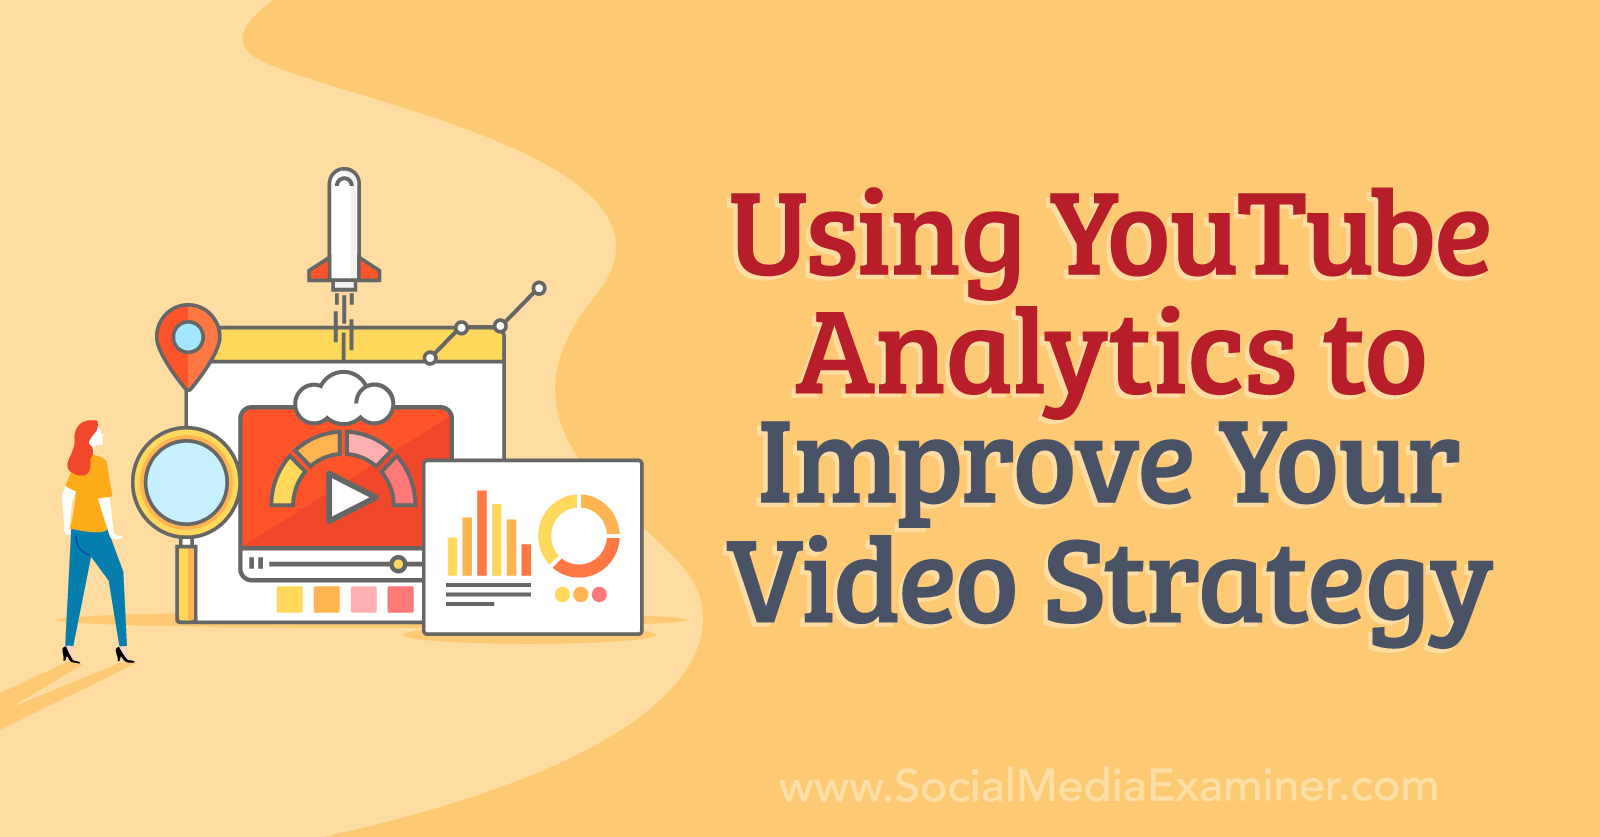 Using YouTube Analytics to Improve Your Video Strategy by Social Media Examiner